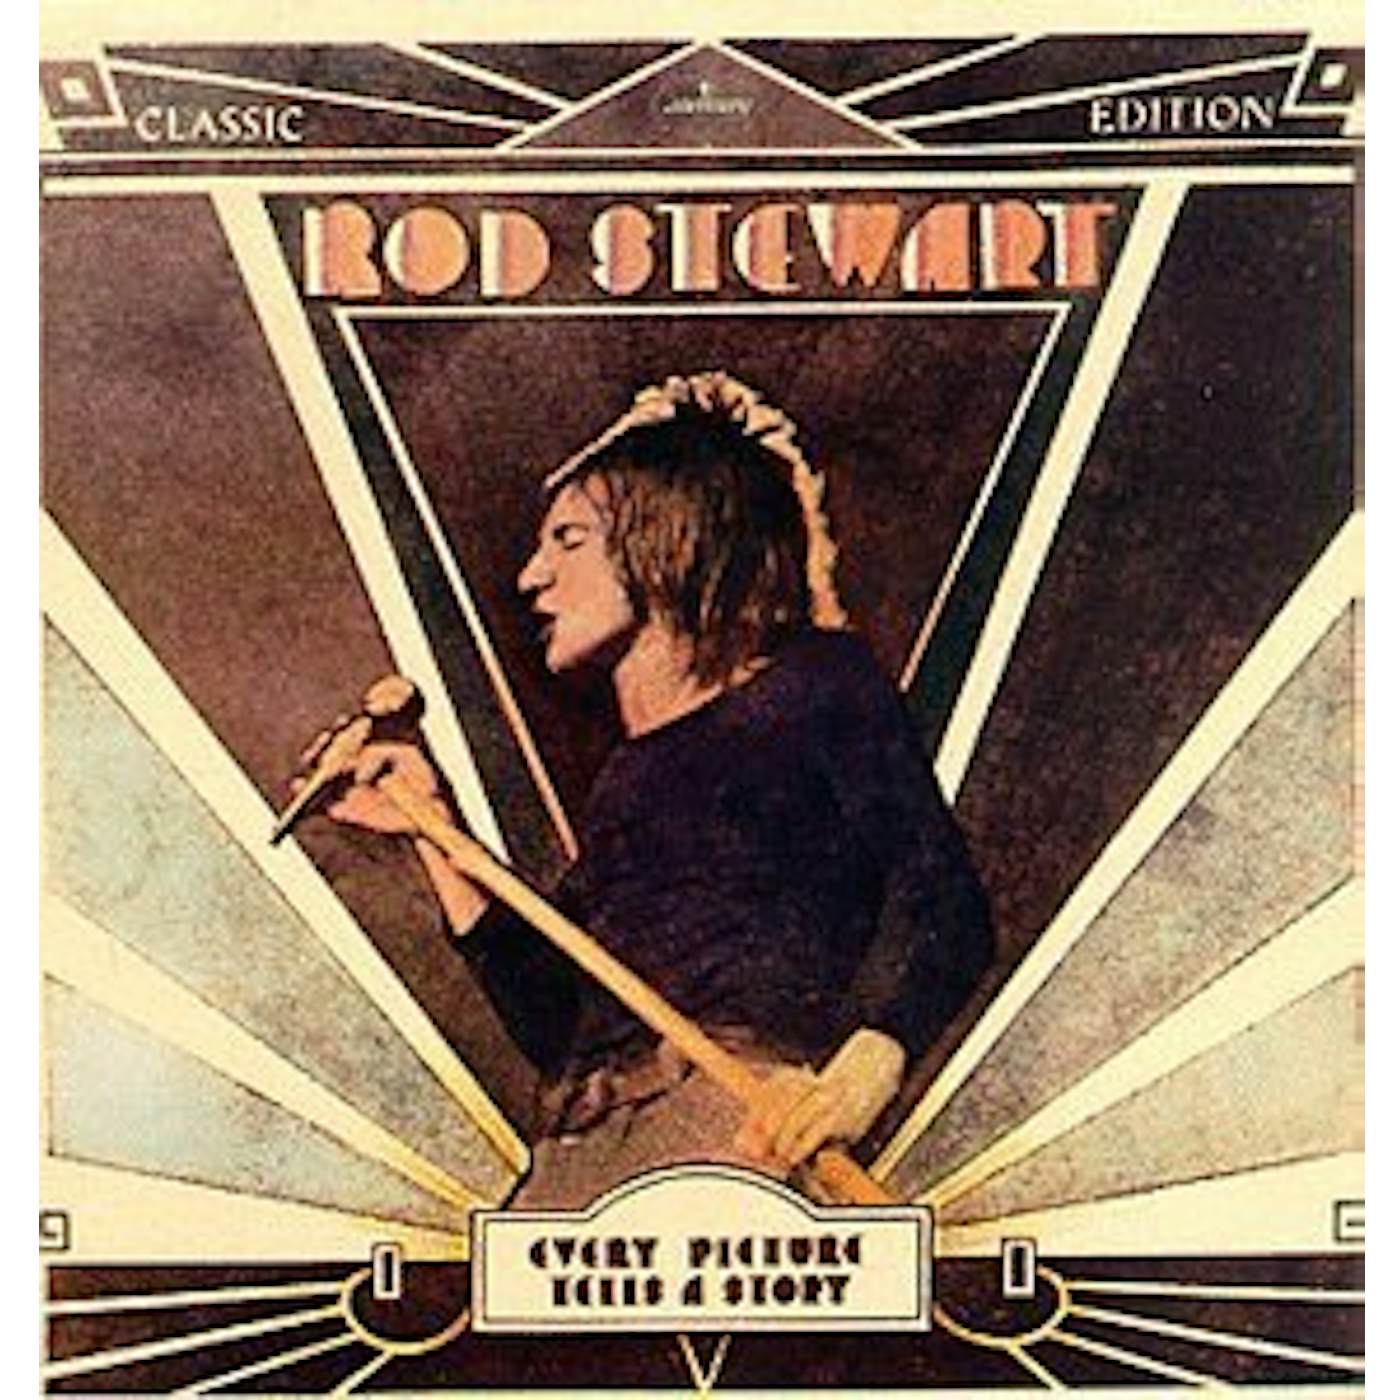 Rod Stewart LP Vinyl Record - Every Picture Tells A Story